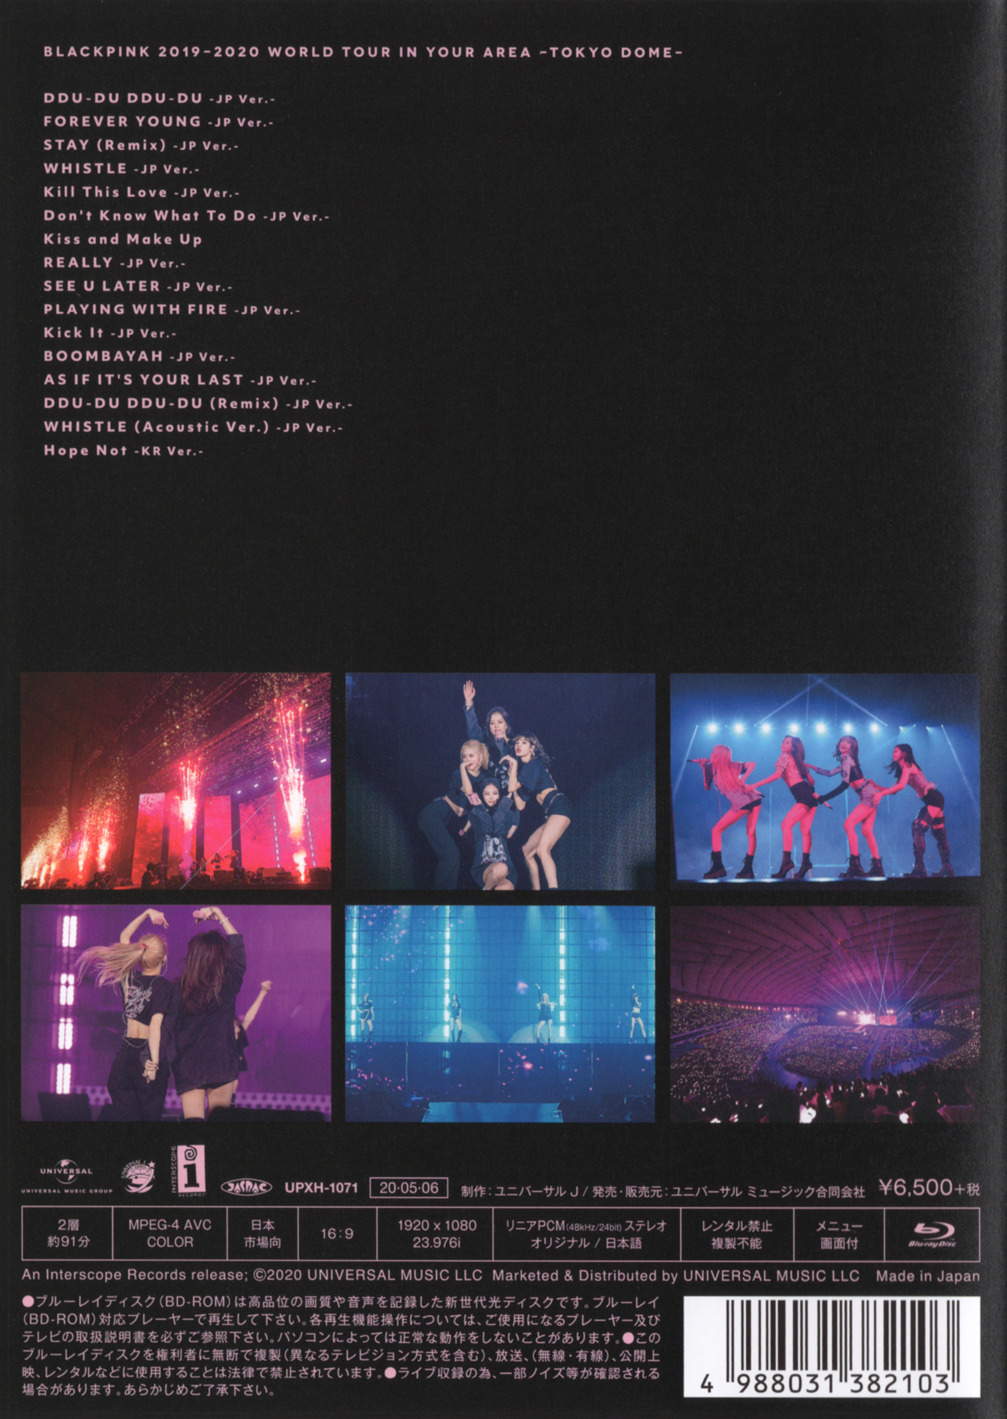 BLACKPINK 2019-2020 WORLD TOUR IN YOUR AREA-TOKYO DOME Blu-ray (Japan)